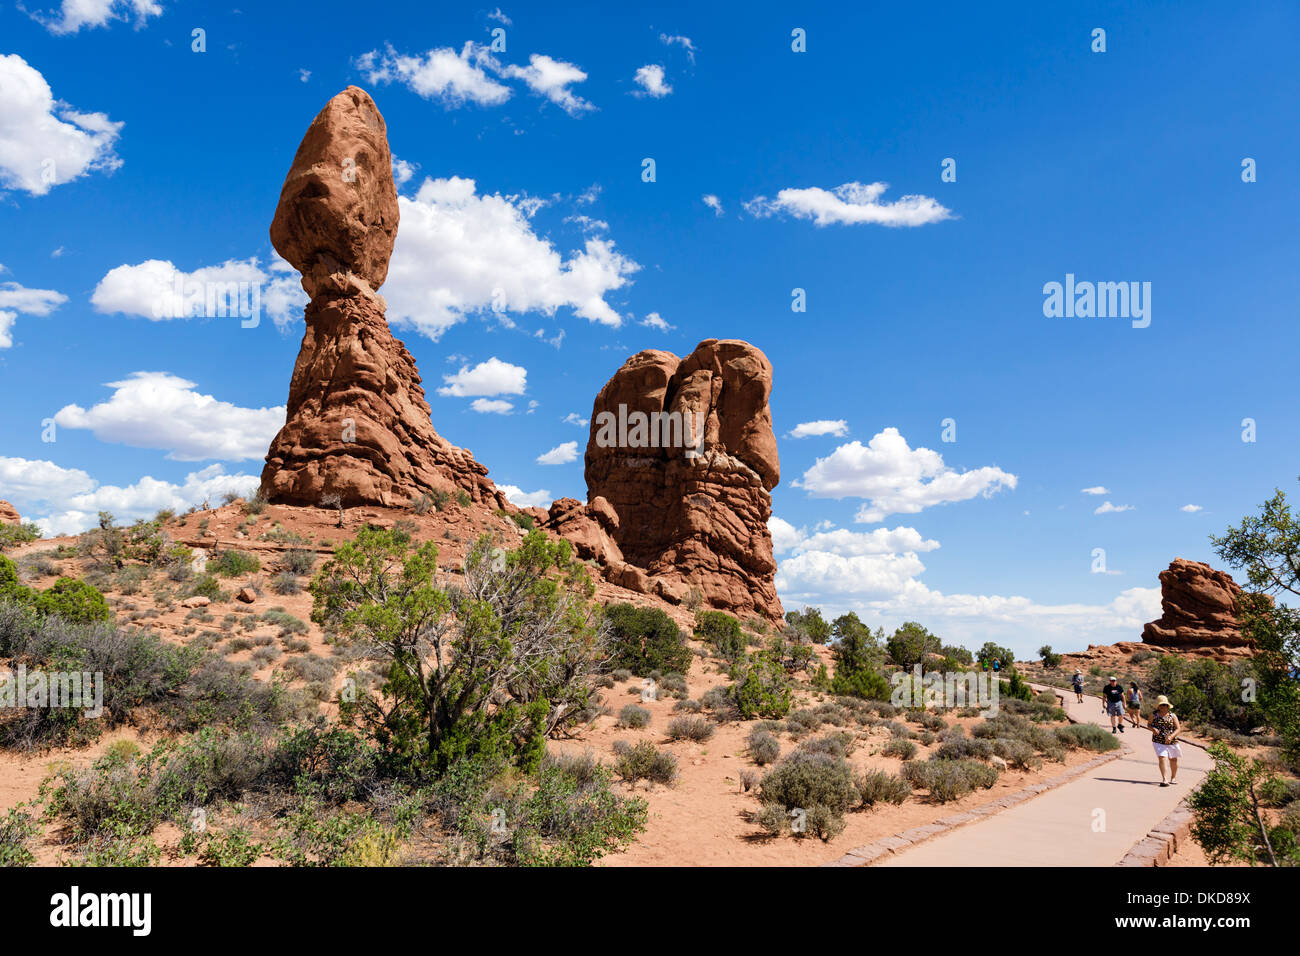 Walkers on the Balanced Rock Trail, Arches National Park, Utah, USA Stock Photo